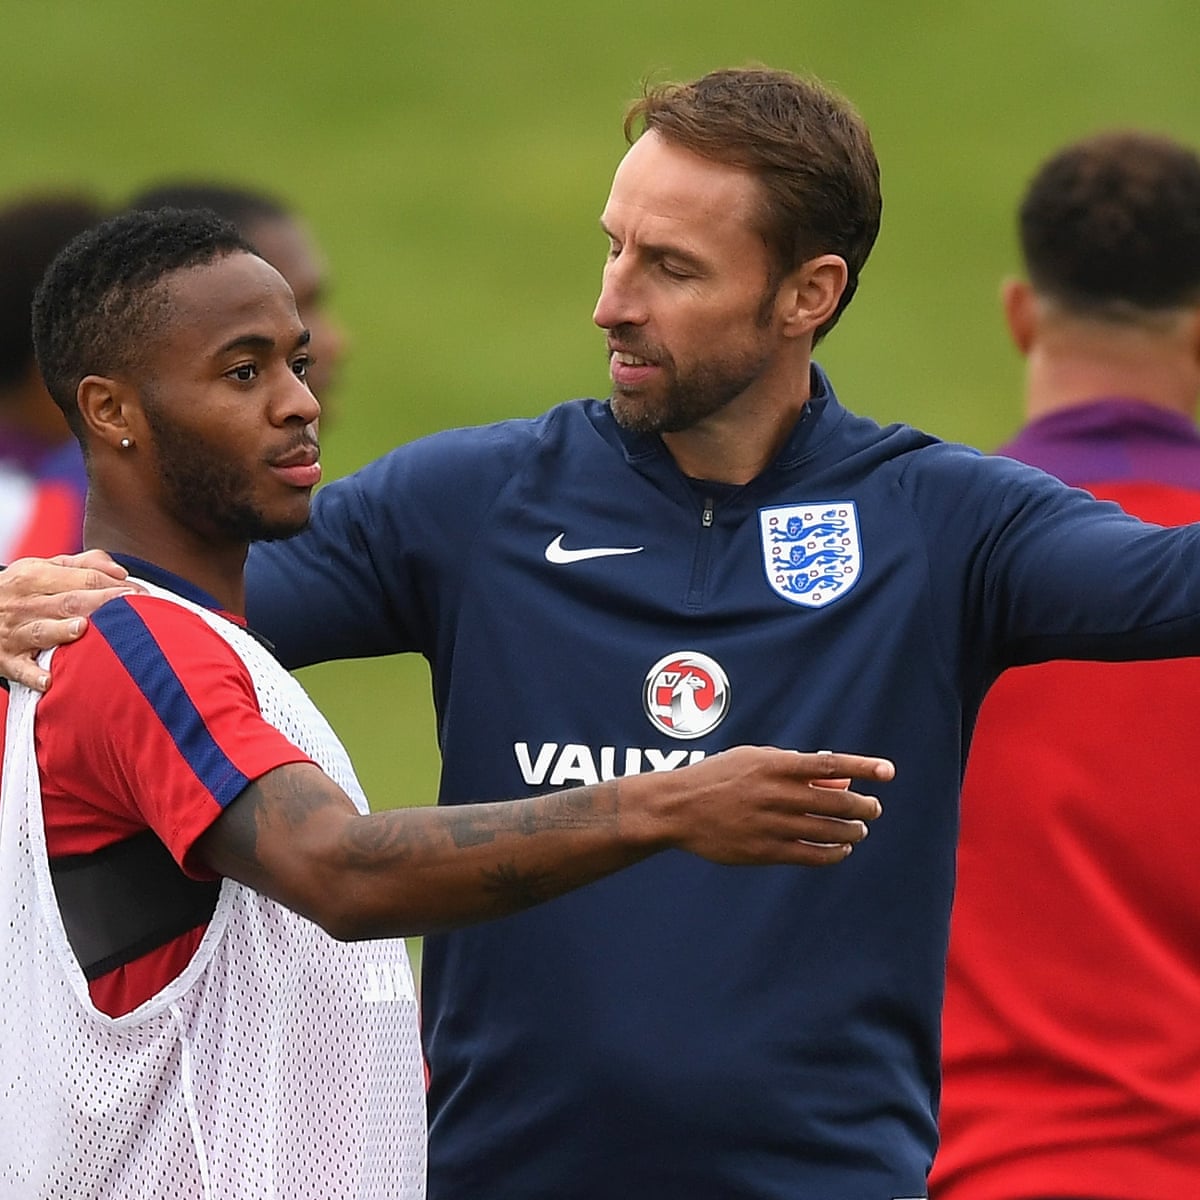 phantom Bother companion Raheem Sterling sorry after arriving 12 hours late for England training | Raheem  Sterling | The Guardian